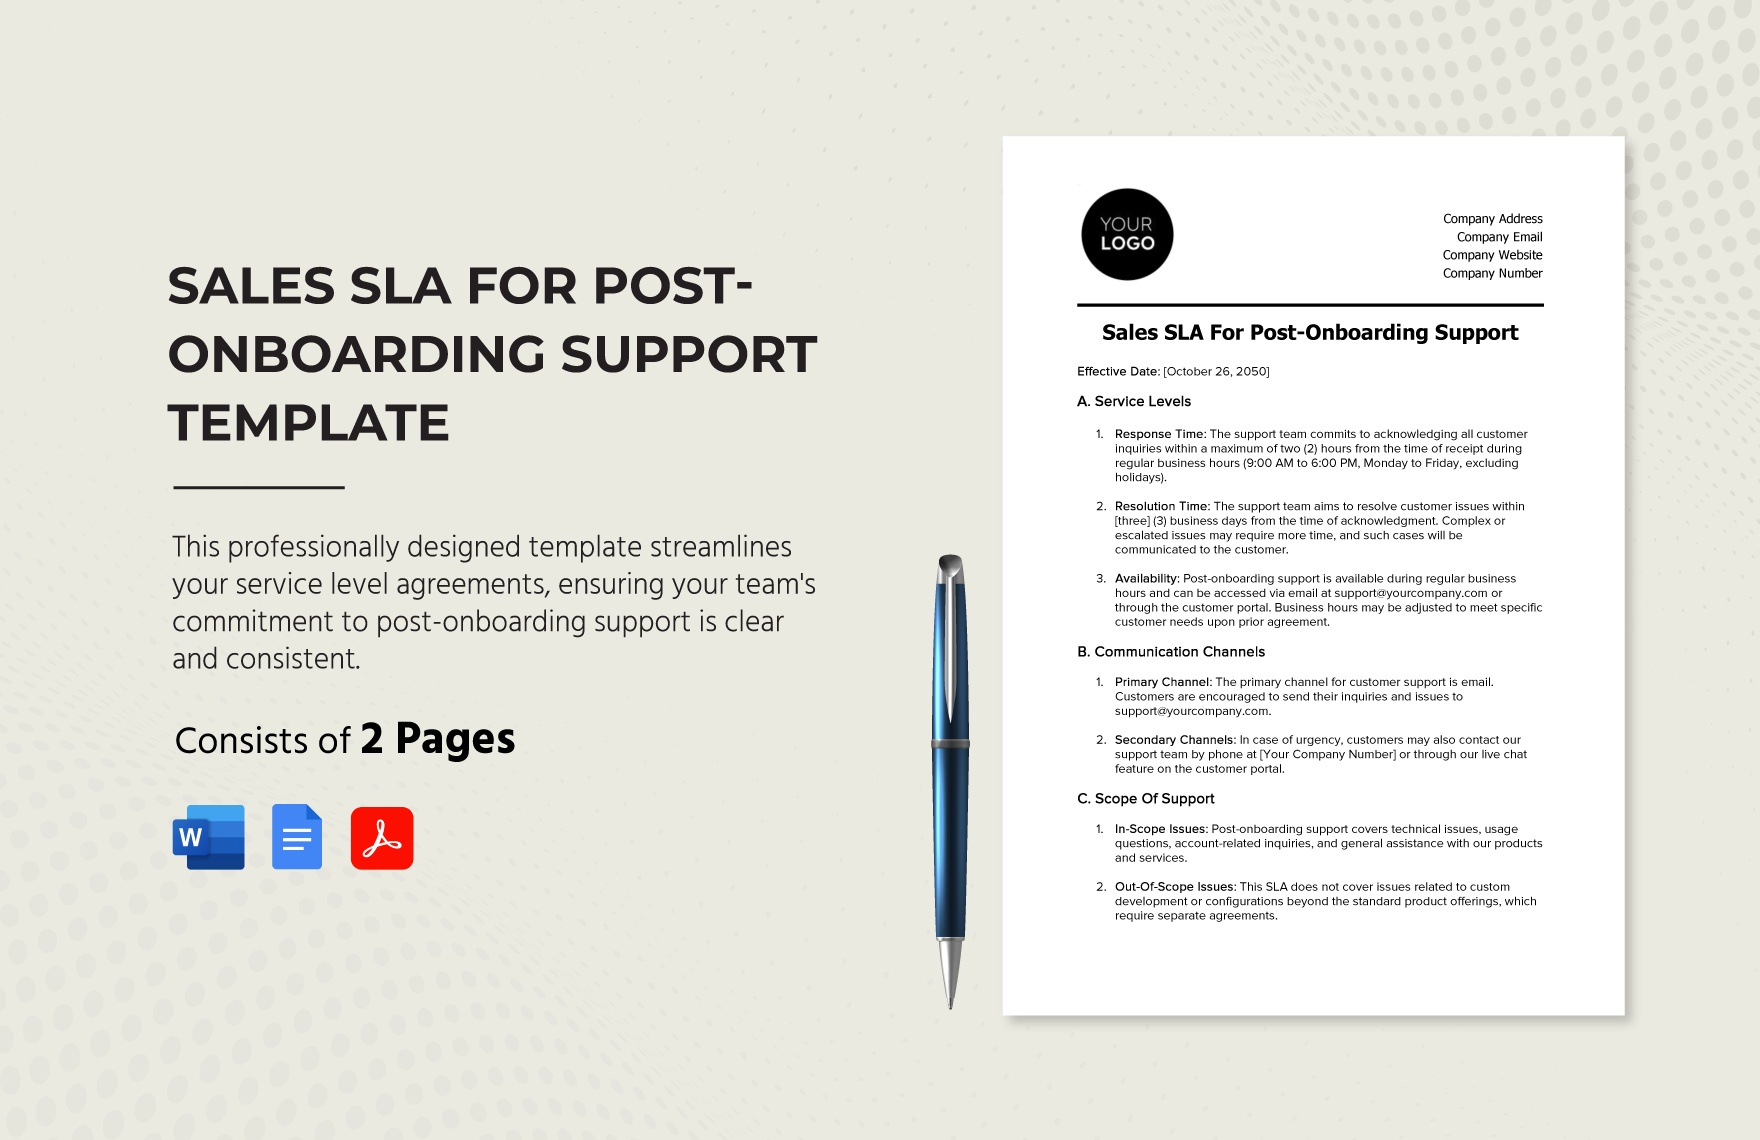 Sales SLA for Post-Onboarding Support Template